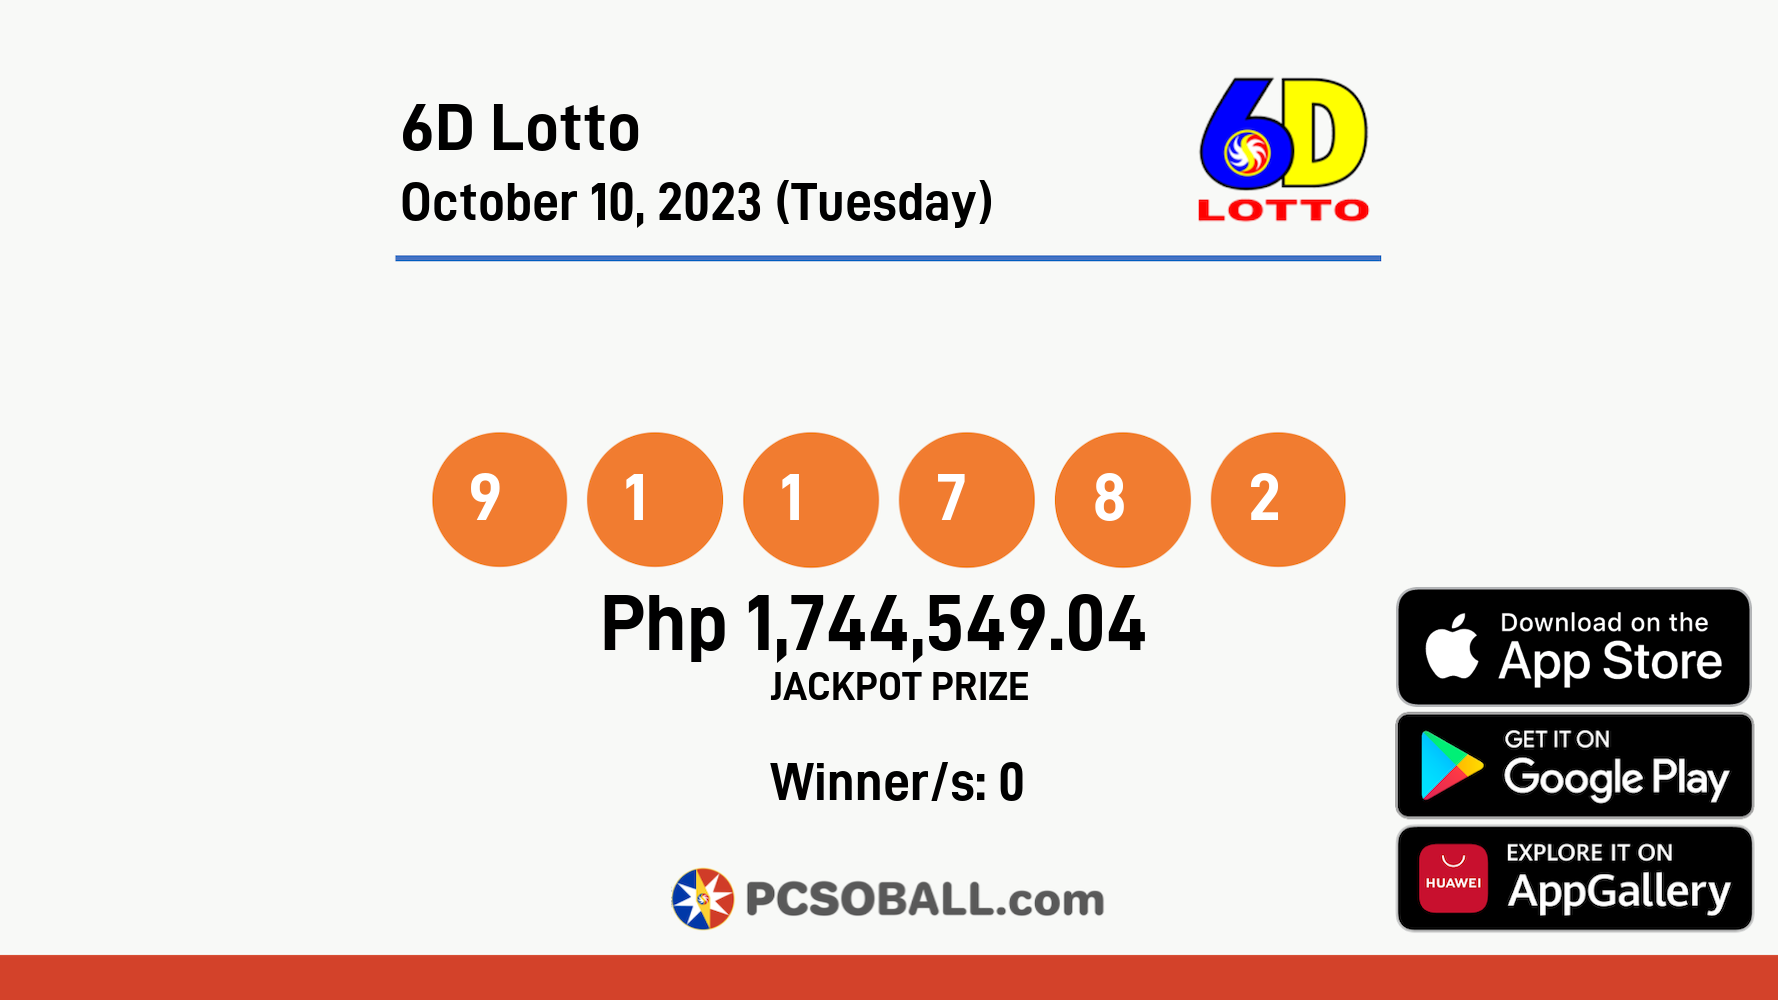 6D Lotto October 10, 2023 (Tuesday) Result